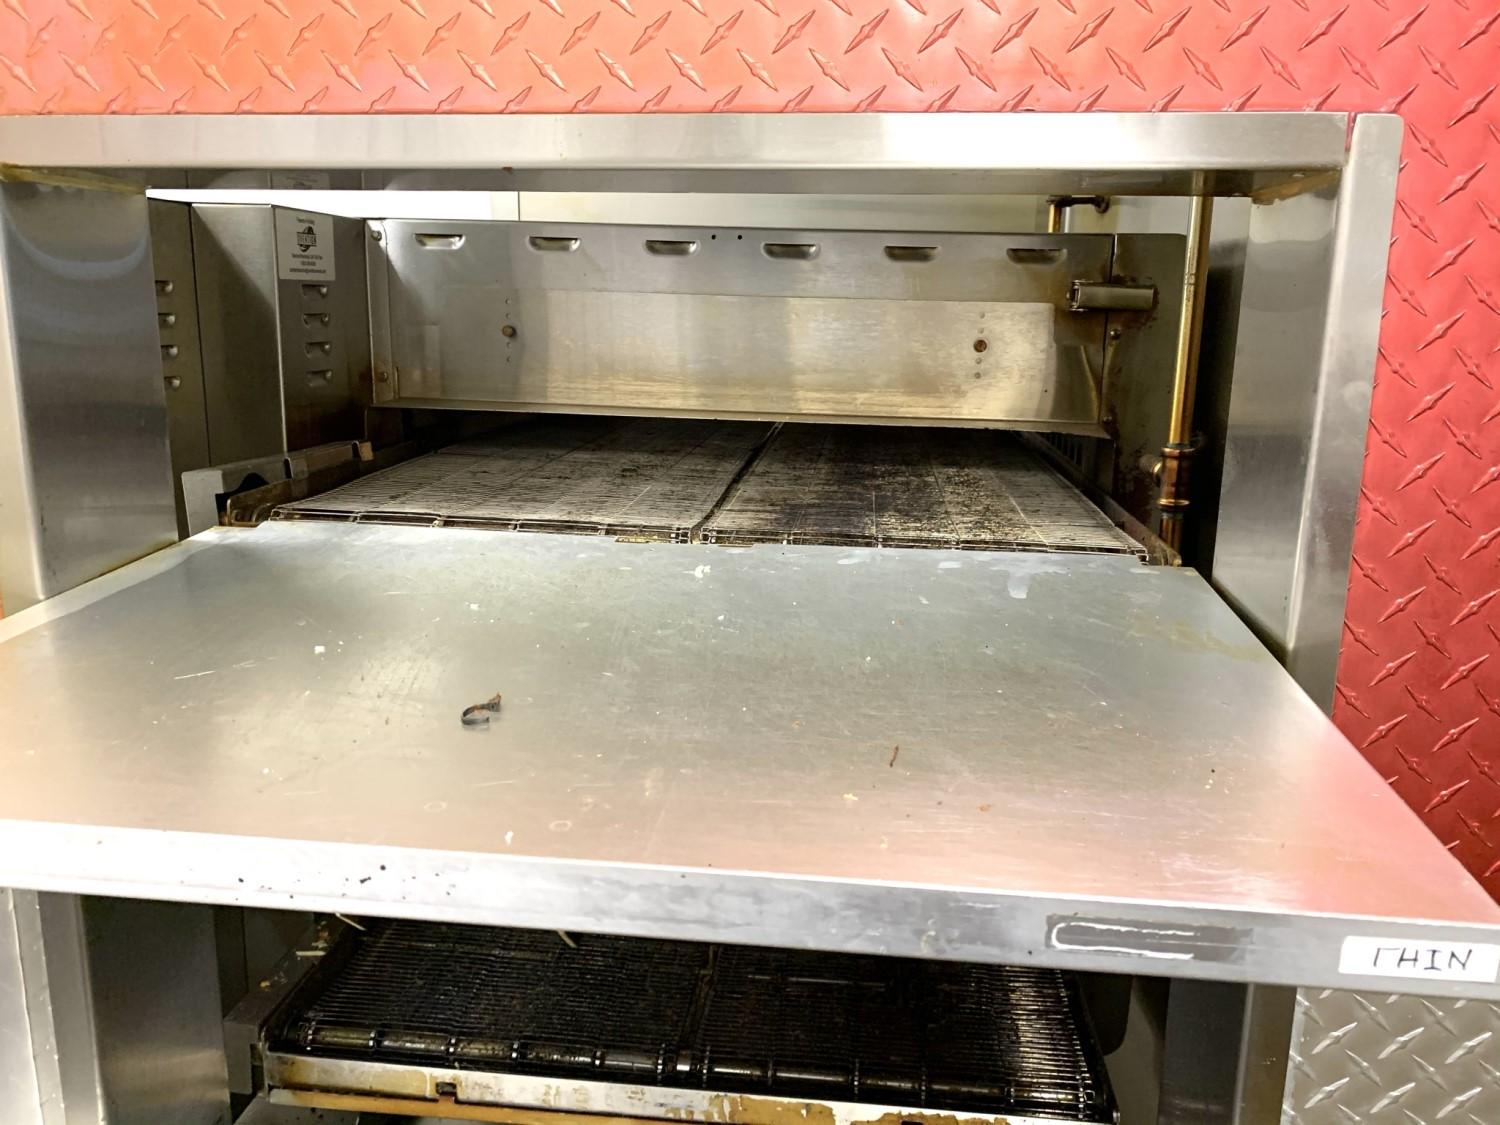 2 Ovention Conveyor Pizza Ovens